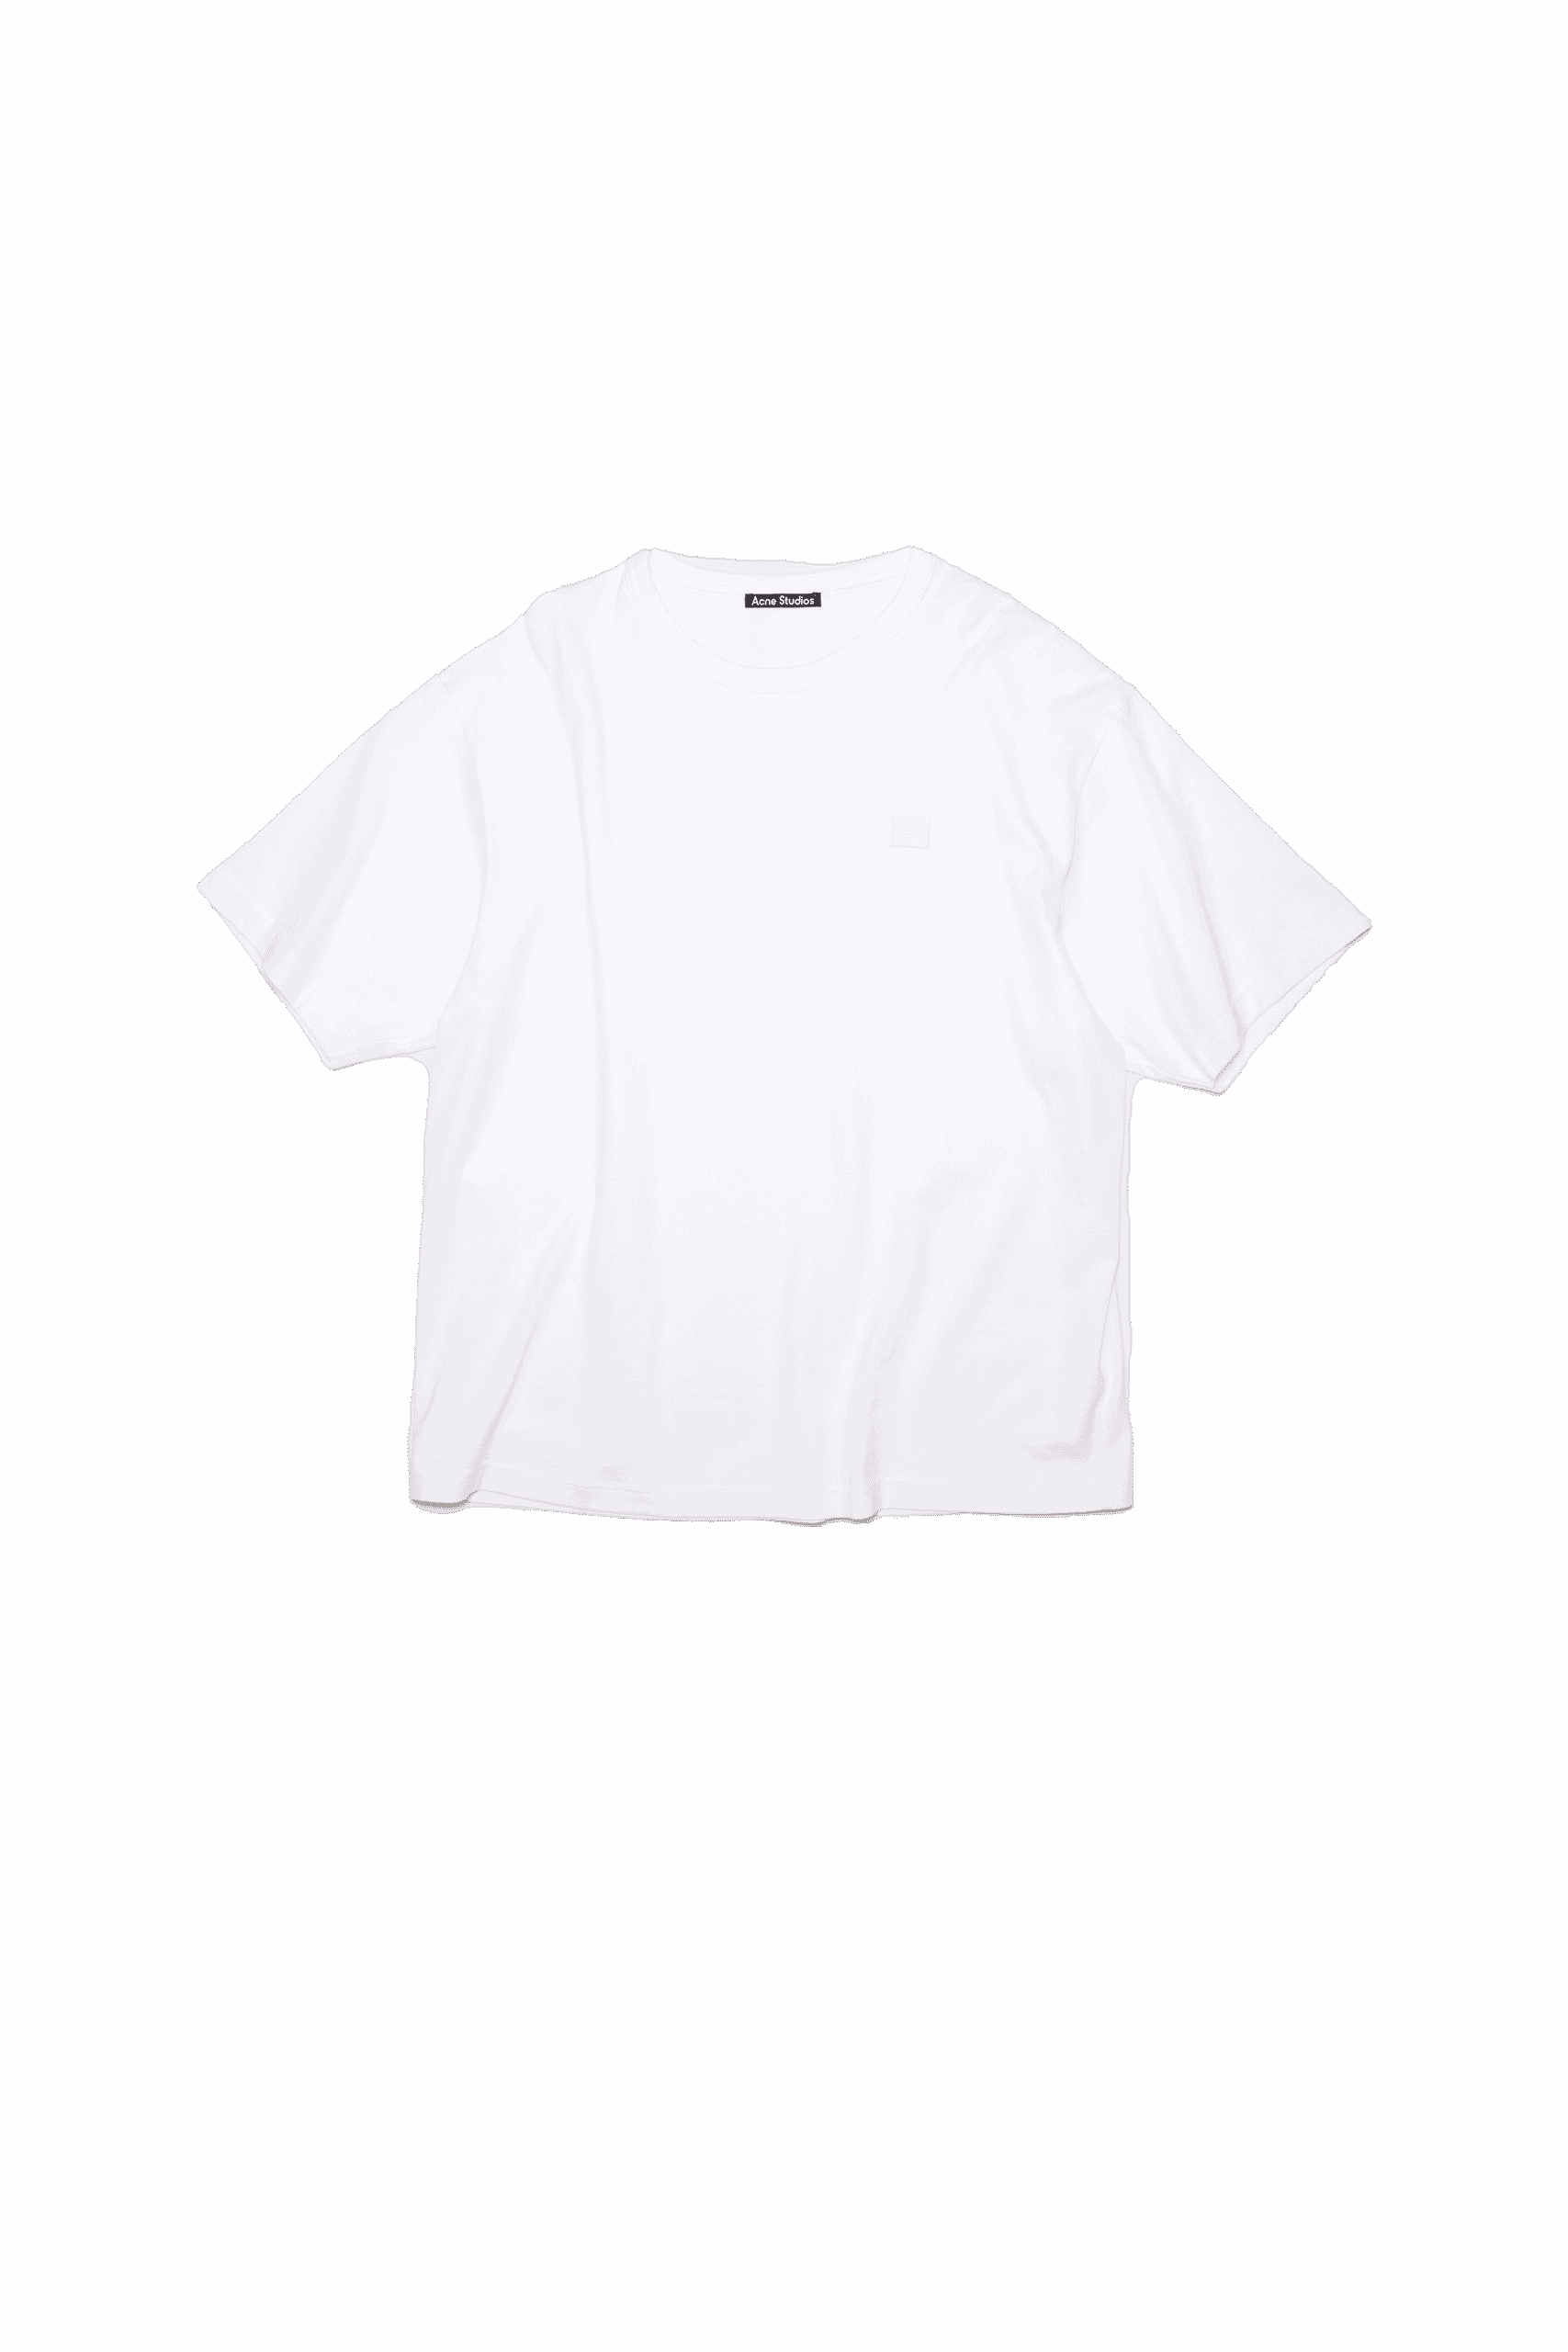 AcneStudios】FA-UX-TSHI000072 FACE PATCH - Tシャツ/カットソー(半袖